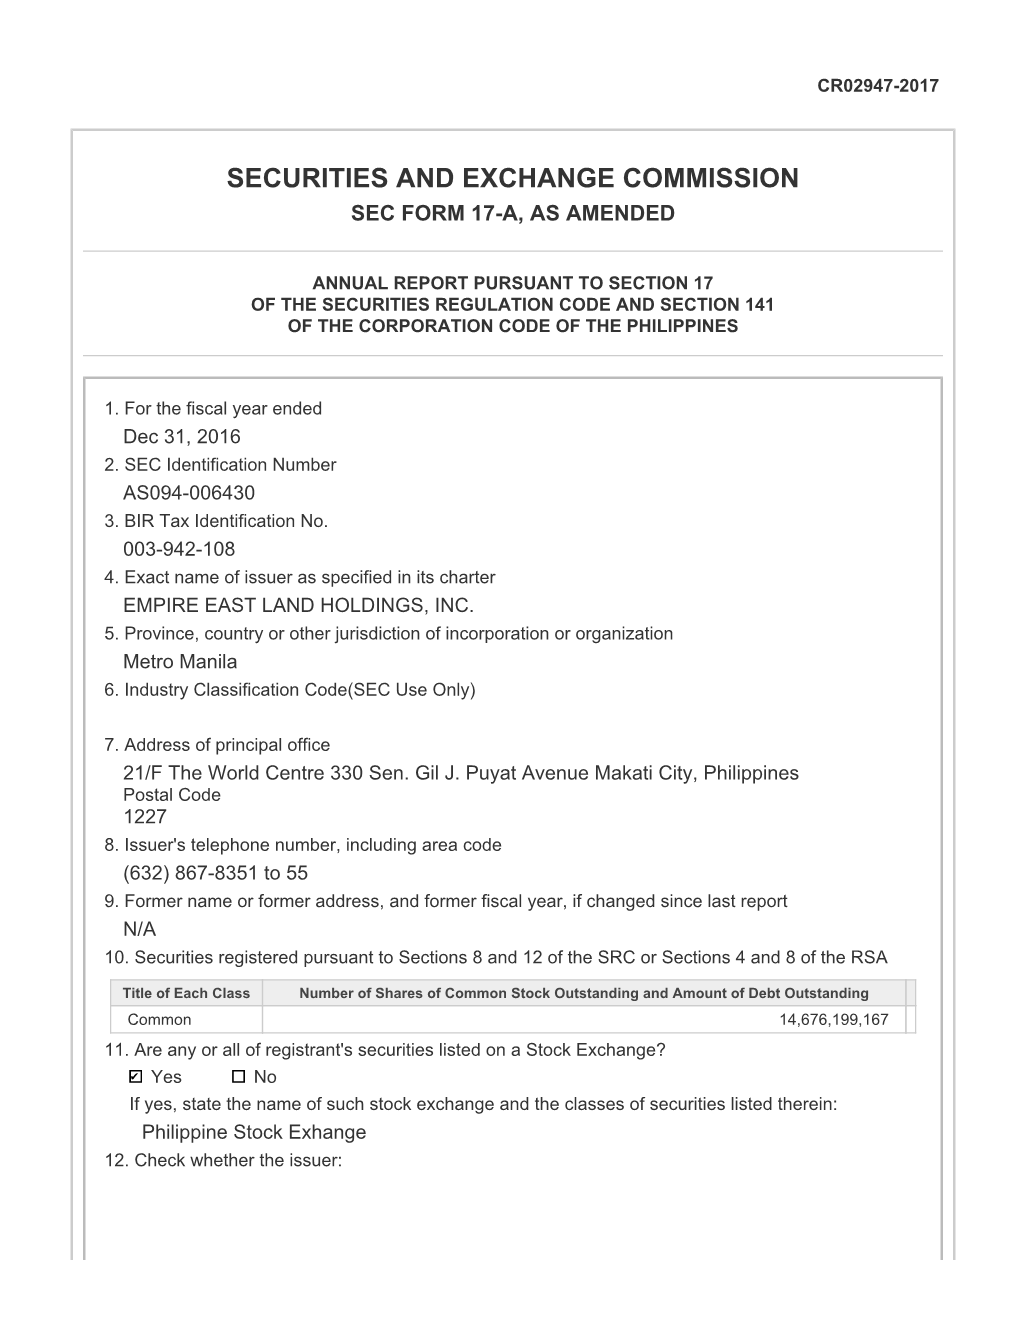 Securities and Exchange Commission Sec Form 17-A, As Amended